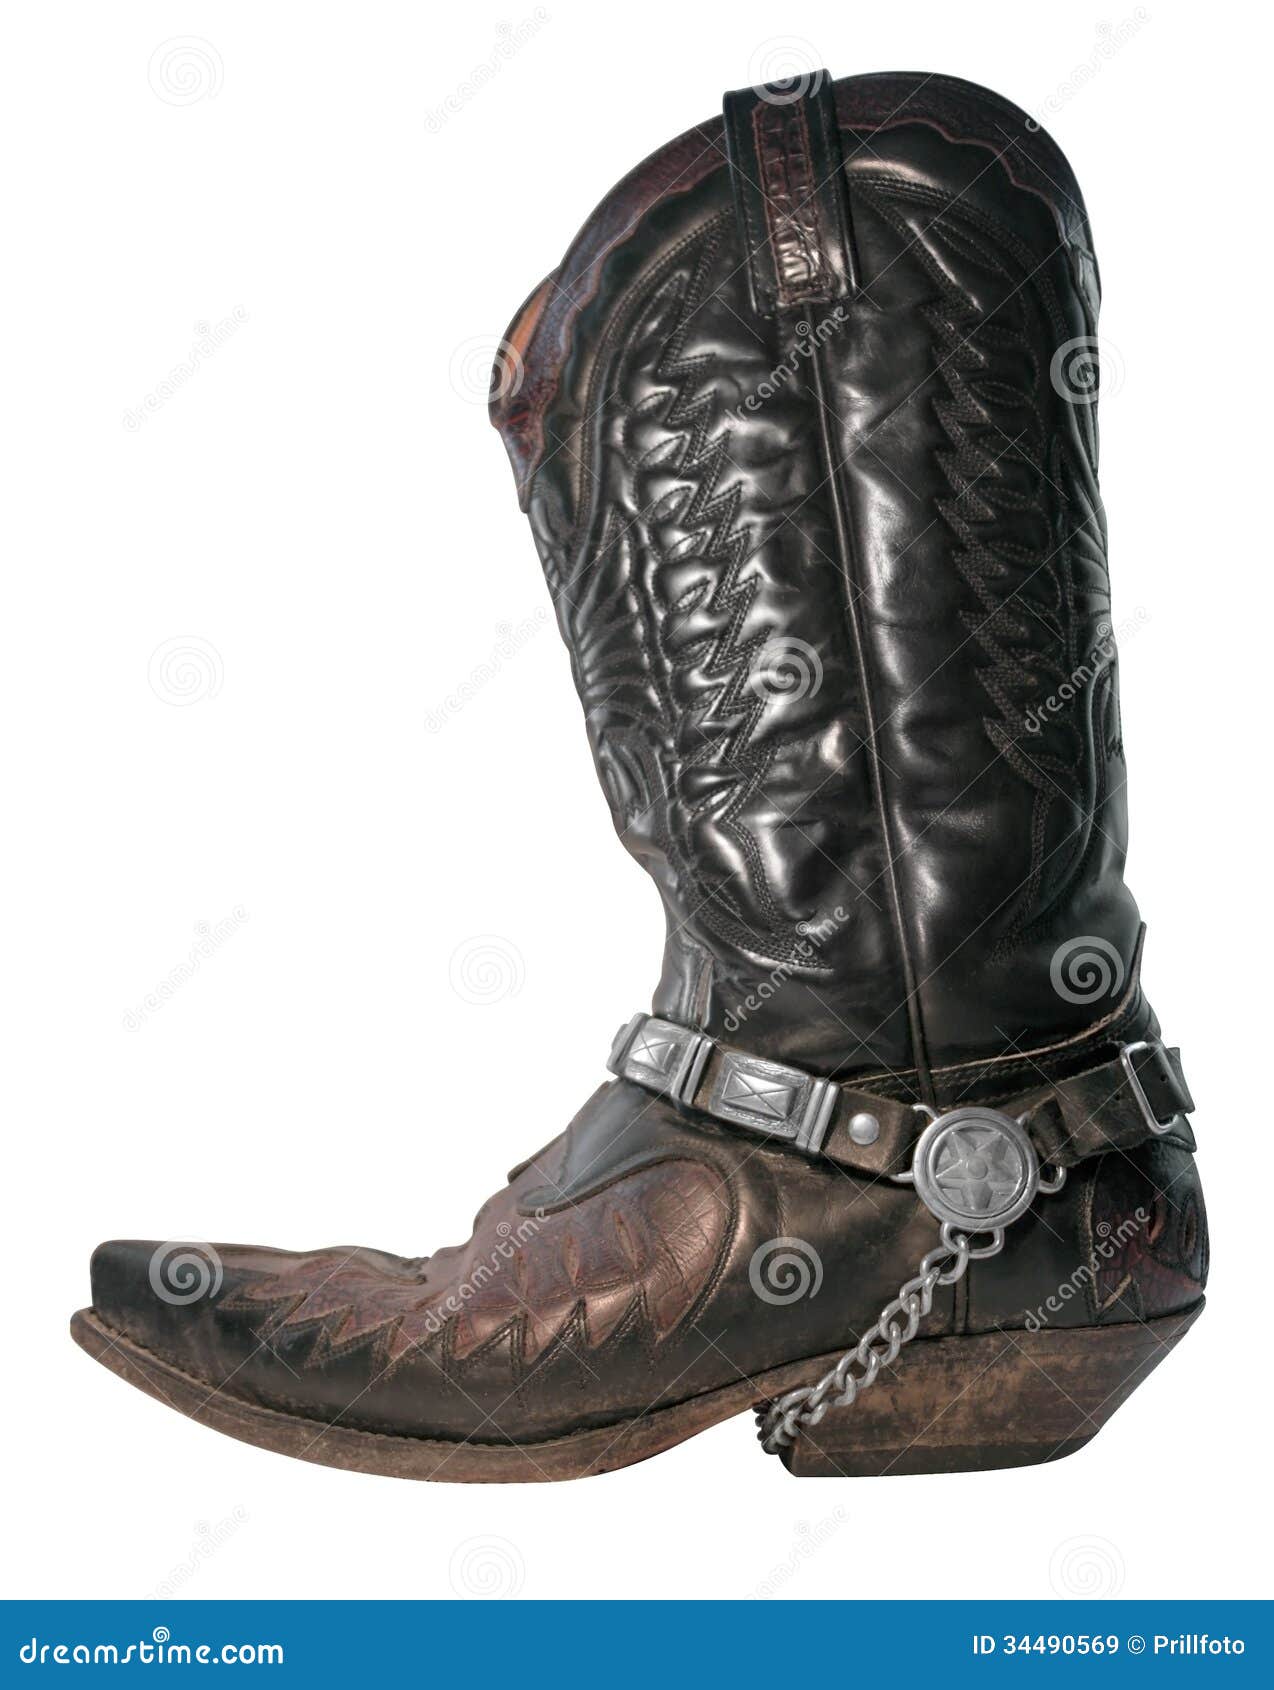 Decorative Cowboy Boot Royalty Free Stock Images - Image: 34490569